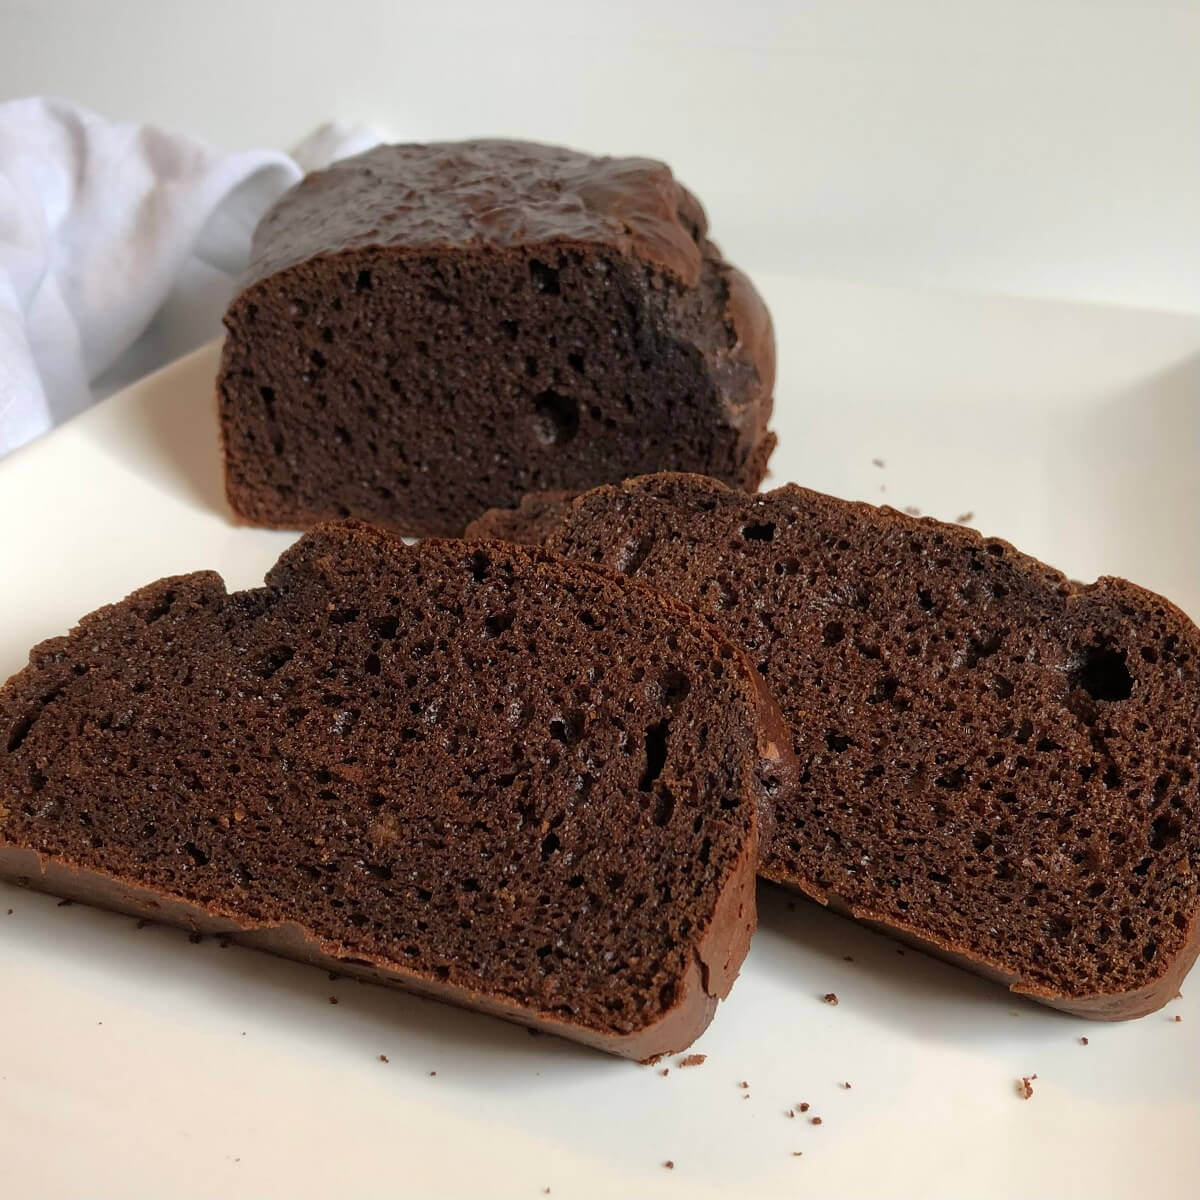 Gluten free bread on a white plate with two slices cut.